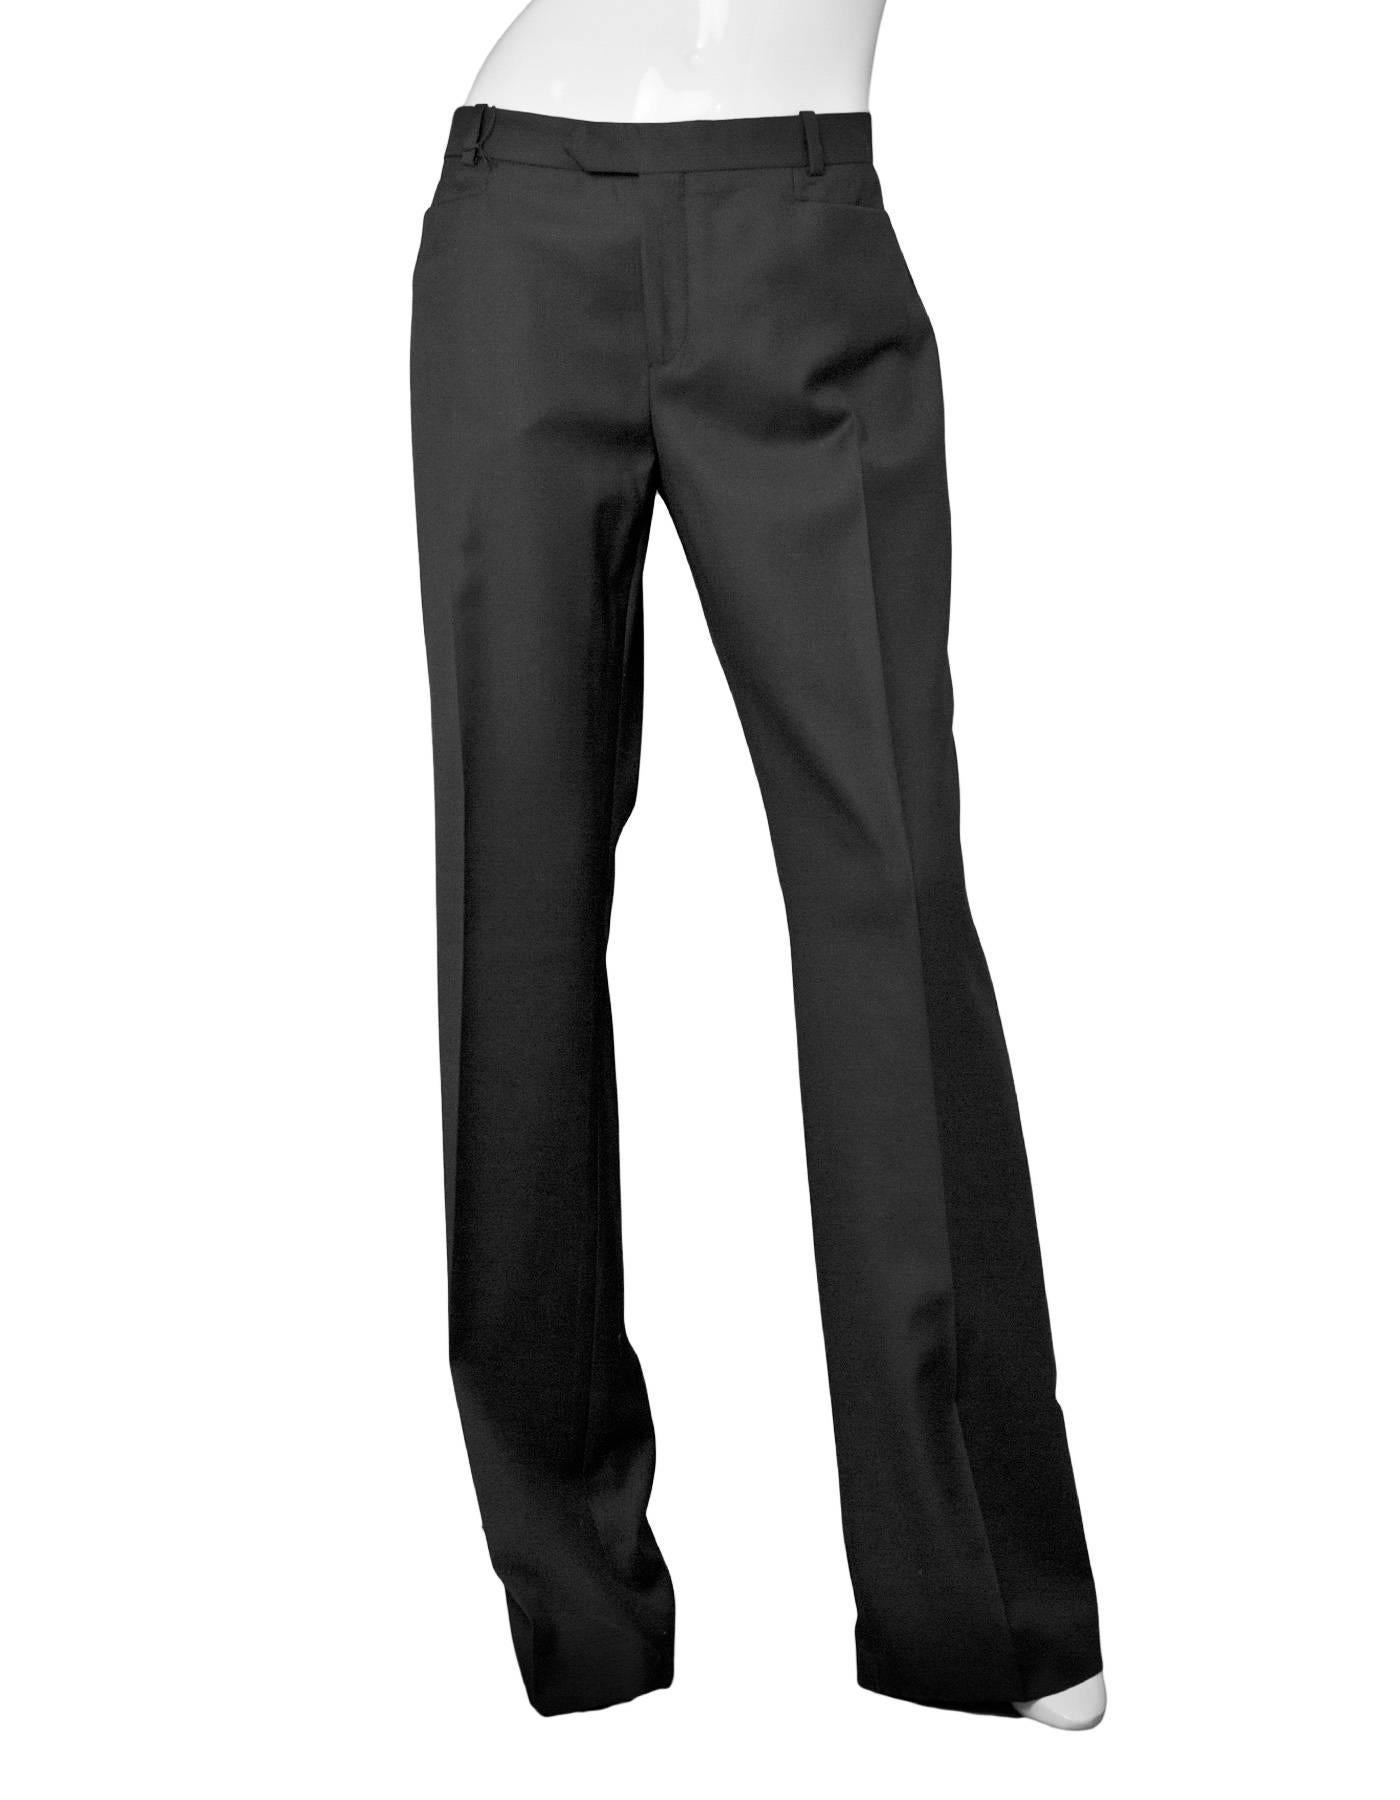 Joseph Black Wool Pants Sz IT42 NWT
Bootcut pant in Rockstar Super 100 fit

Made In: Romania
Color: Black
Composition: 100% Wool
Lining: None
Closure/Opening: Front zip and double hook closure
Exterior Pockets: Two back pockets and two slit pockets